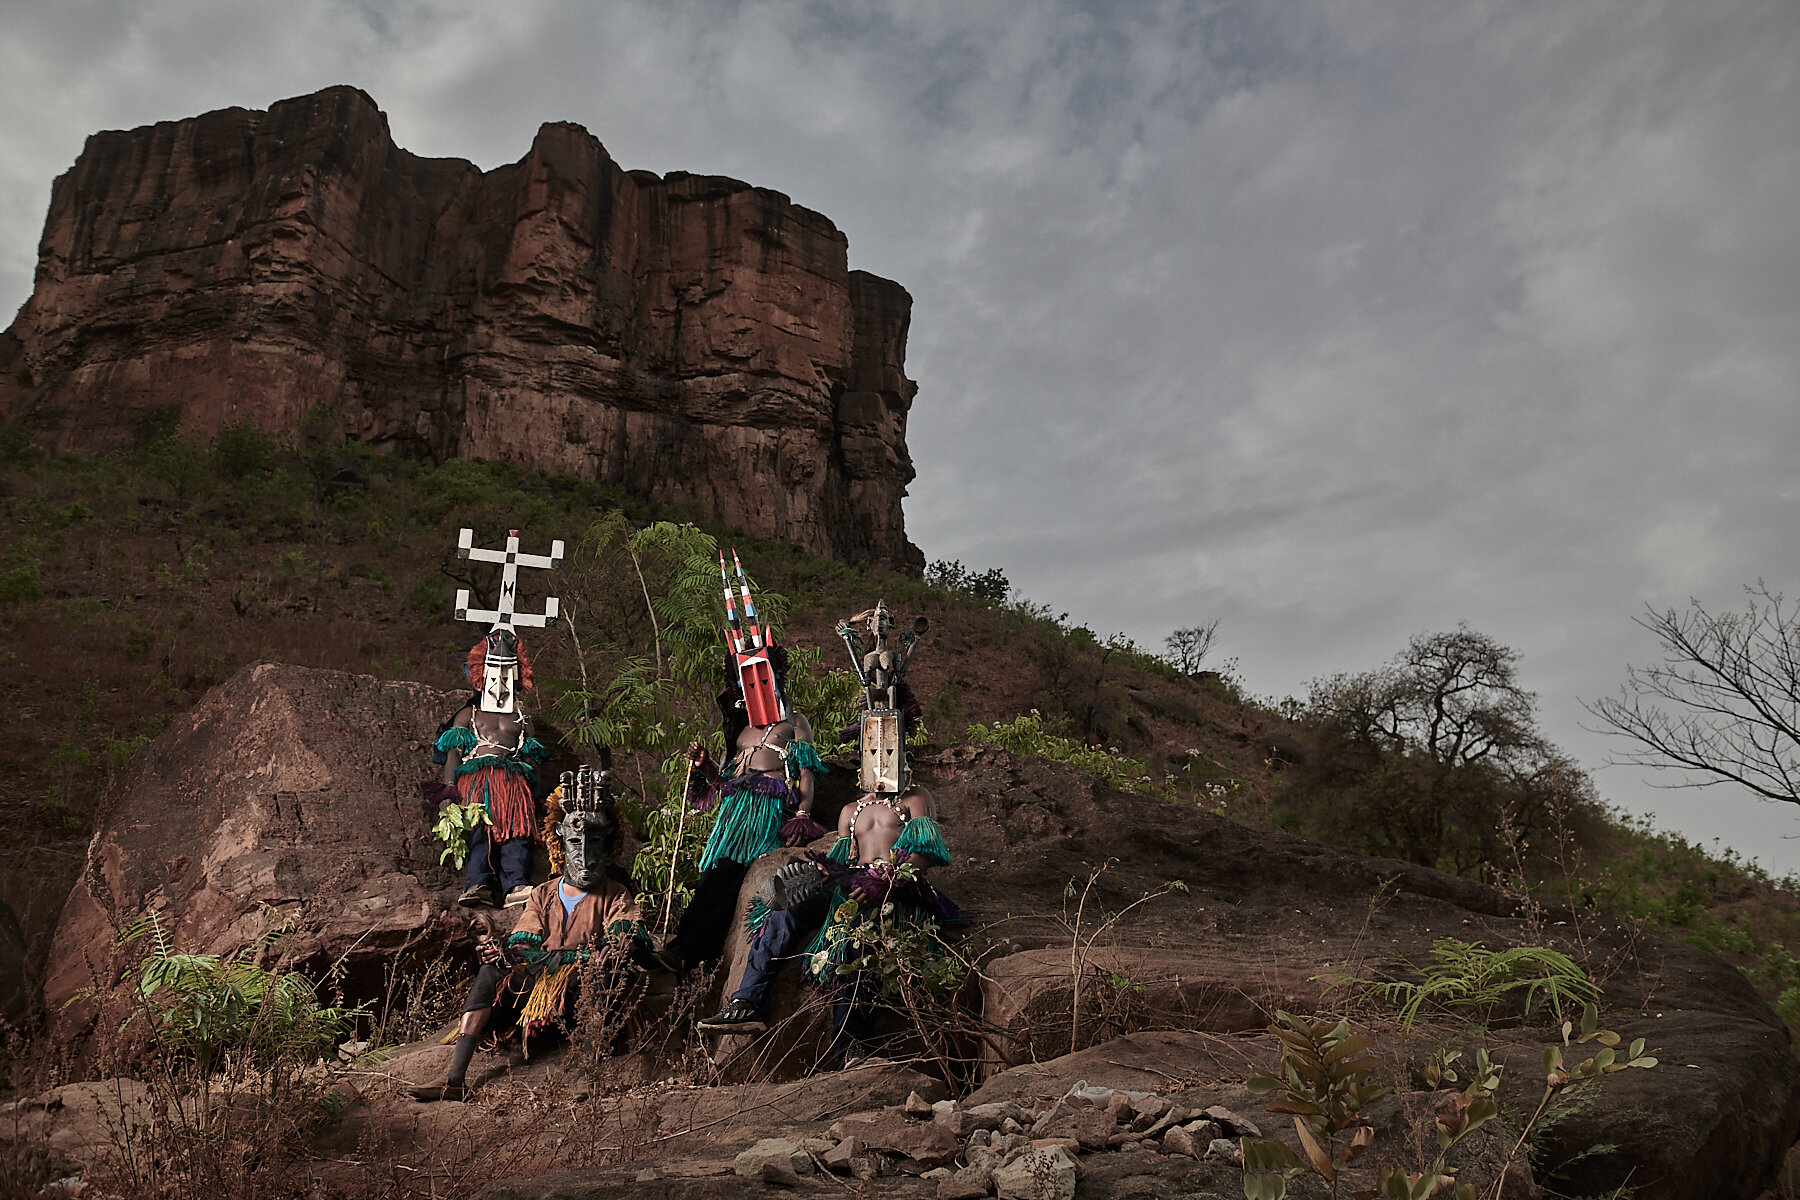 Dogon warriors against the imposing rocks of Manding country